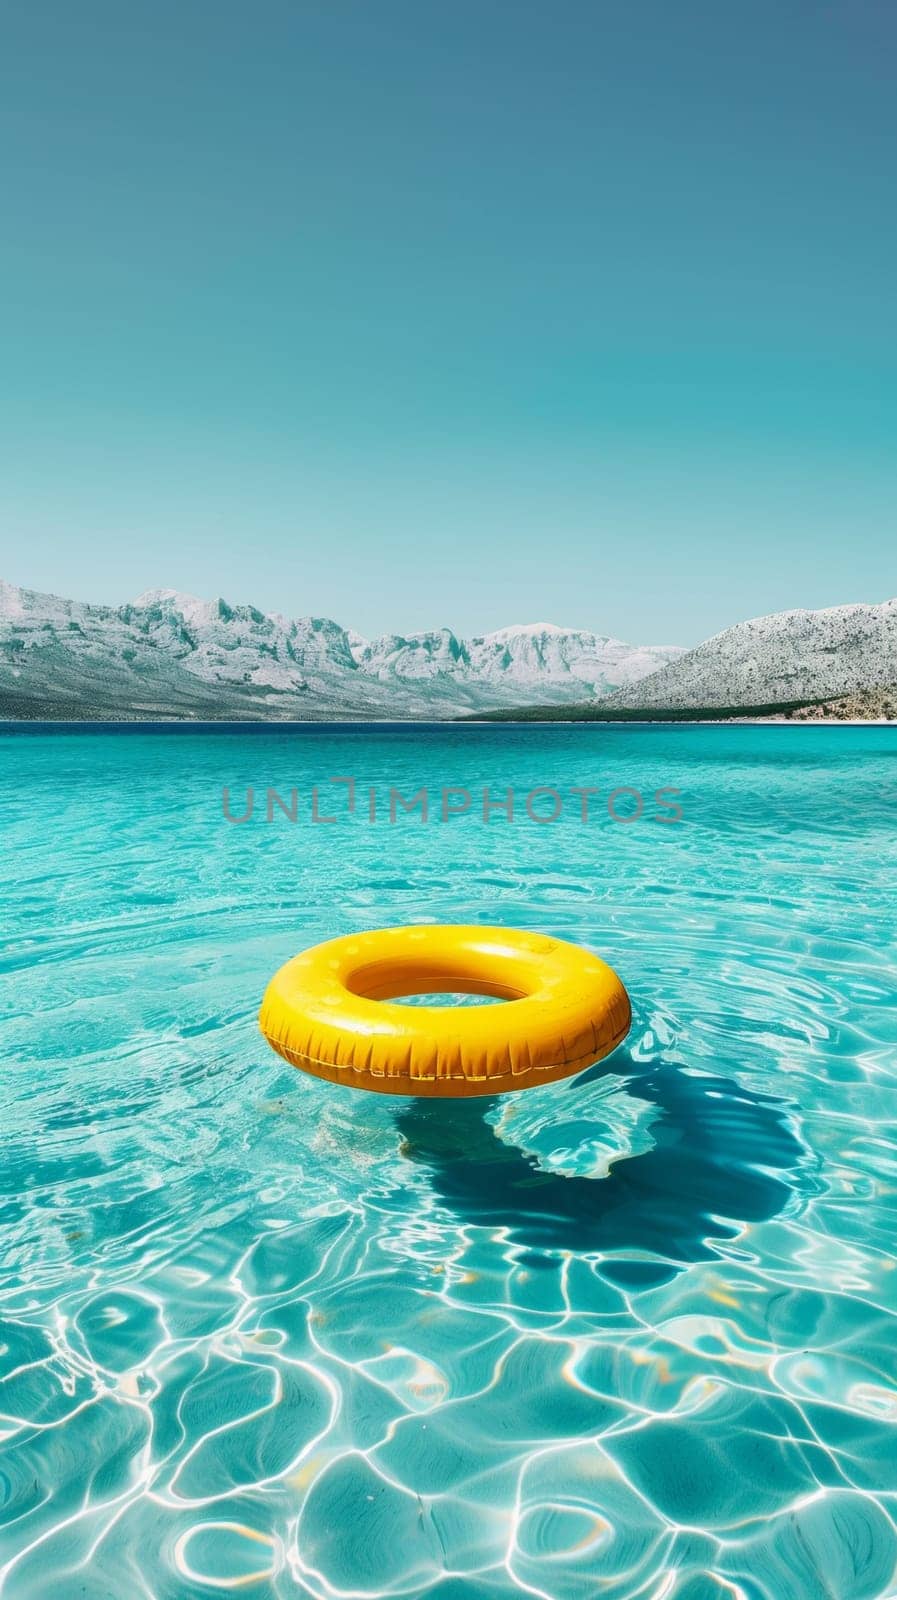 A yellow floating ring in the middle of a blue lake